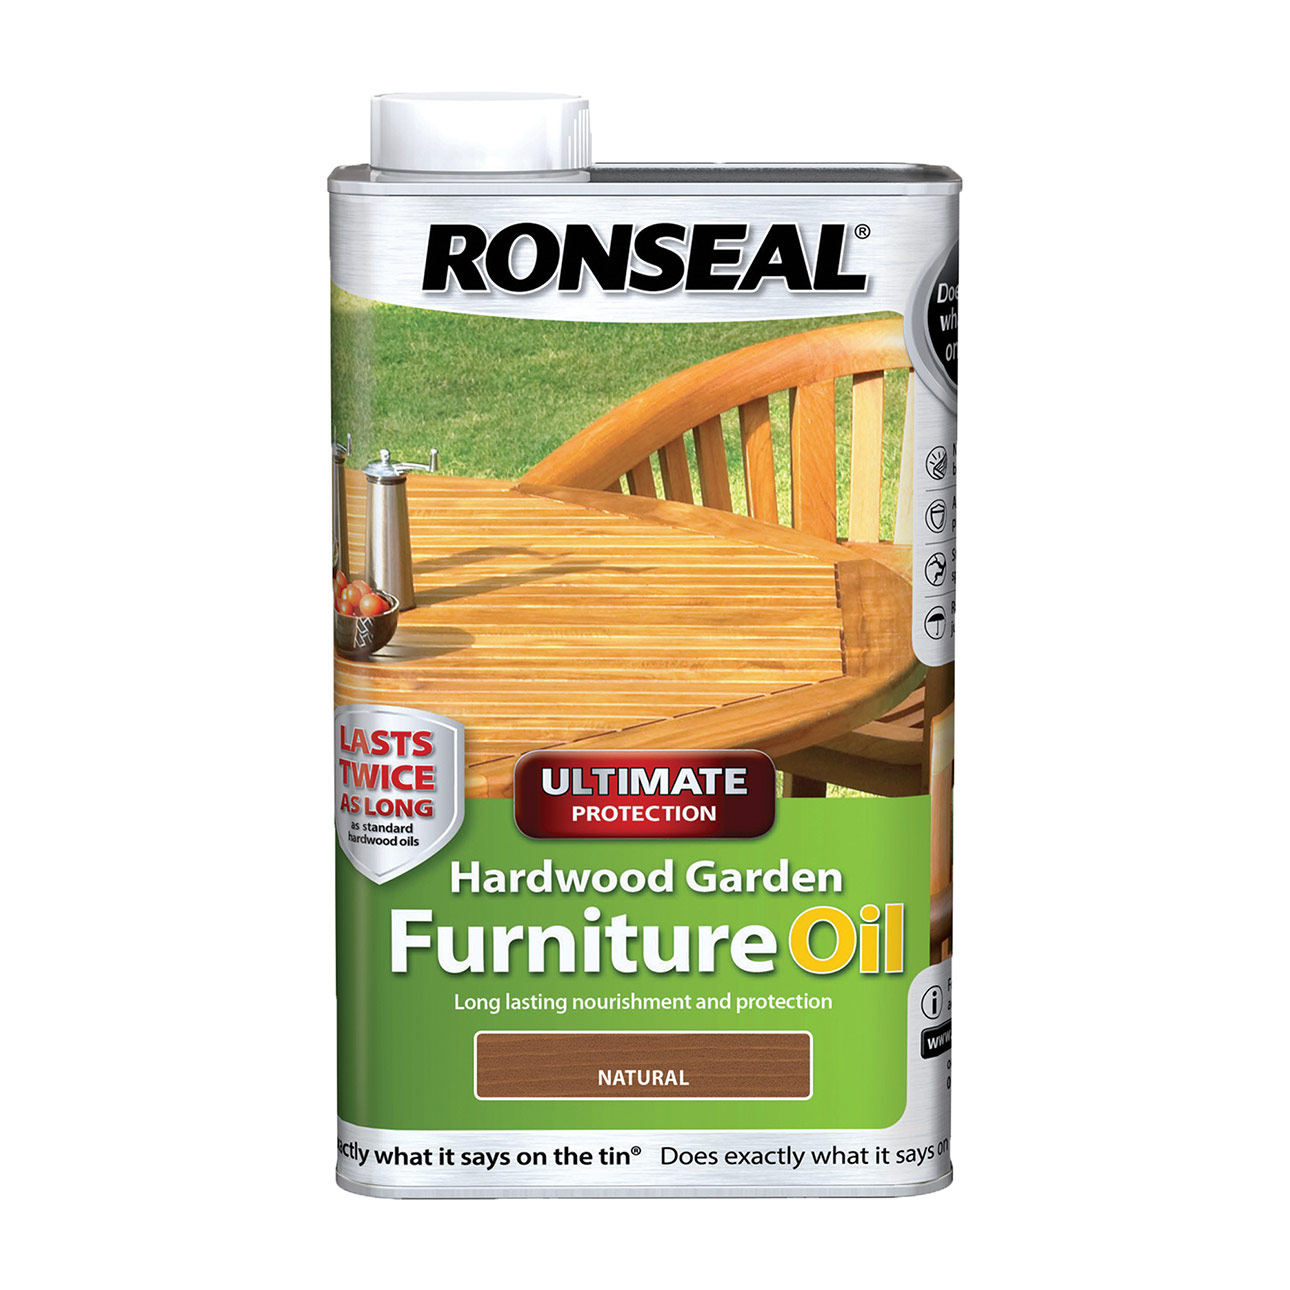 RONSEAL® ULTIMATE PROTECTION HARDWOOD FURNITURE OIL WATER BASED NATURAL CLEAR 0.5L